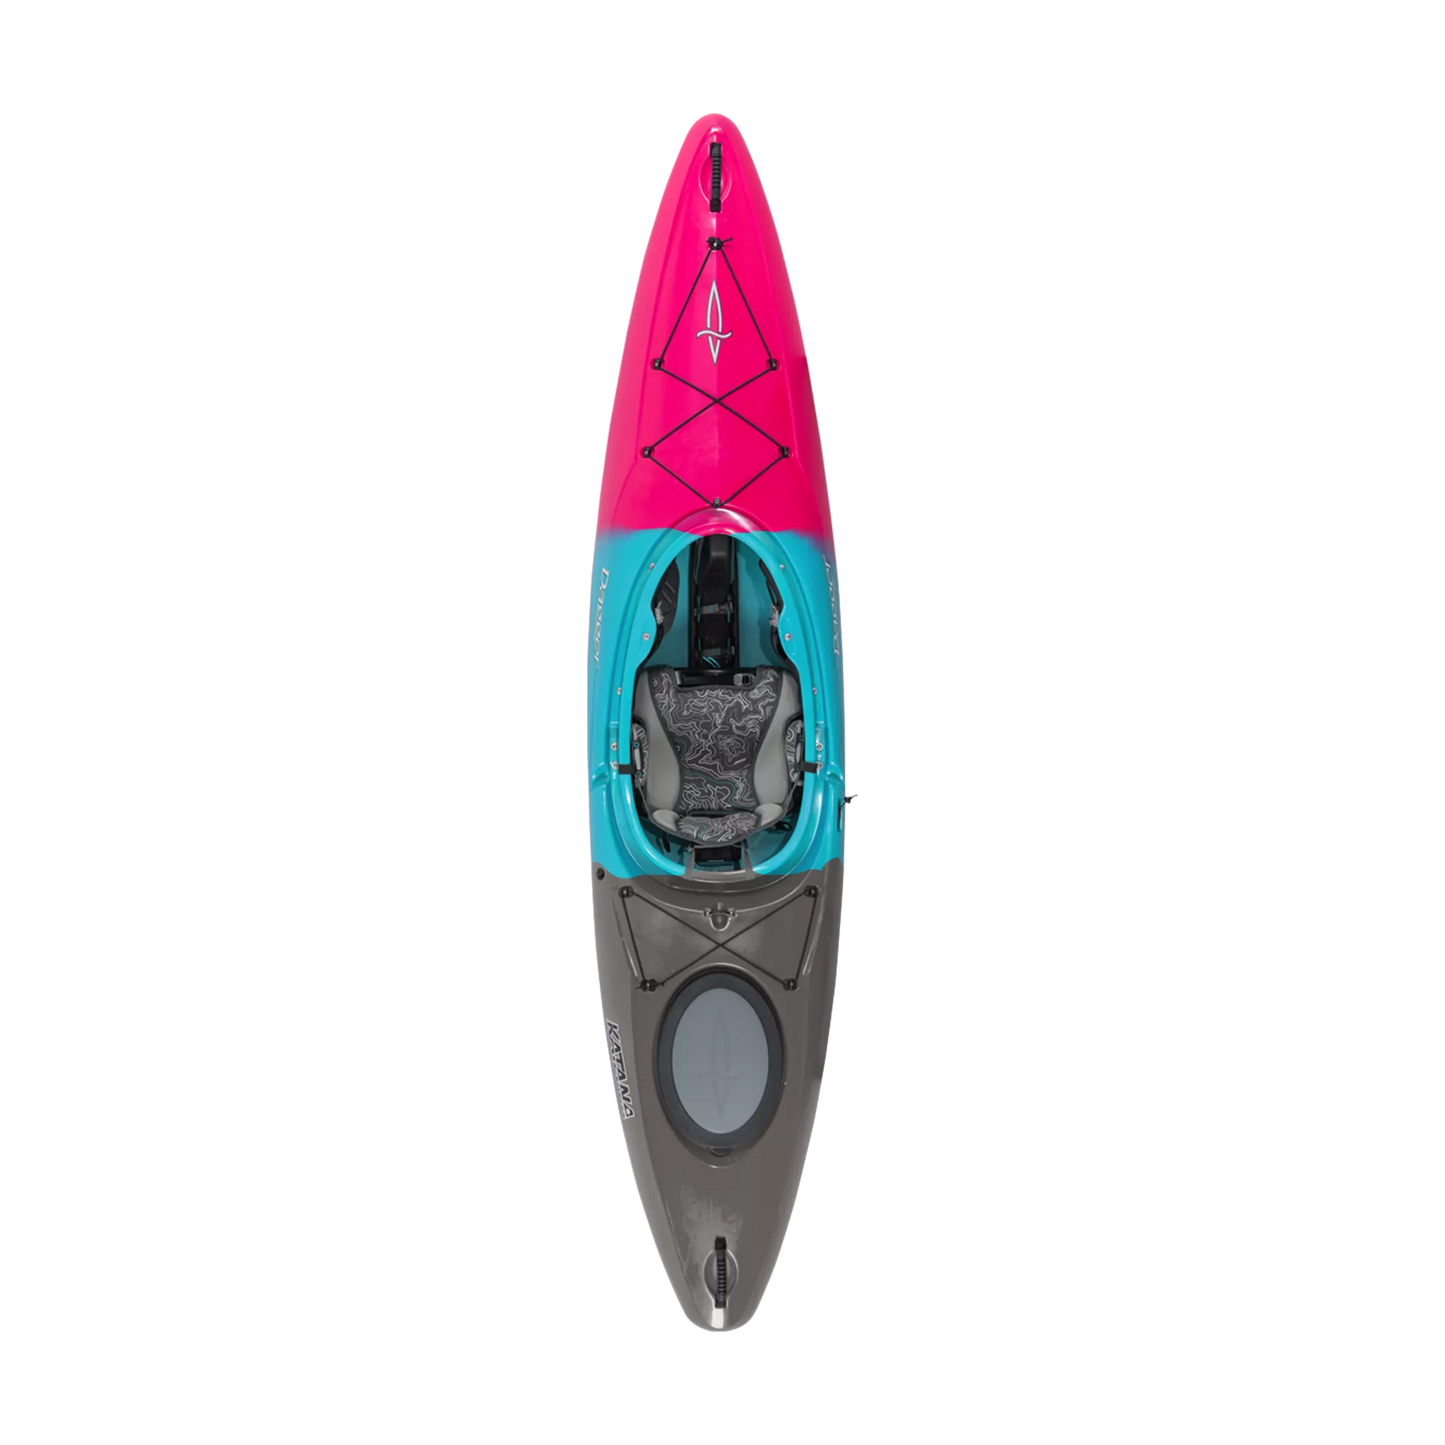 A Katana kayak with a pink and blue interior, made by Dagger.